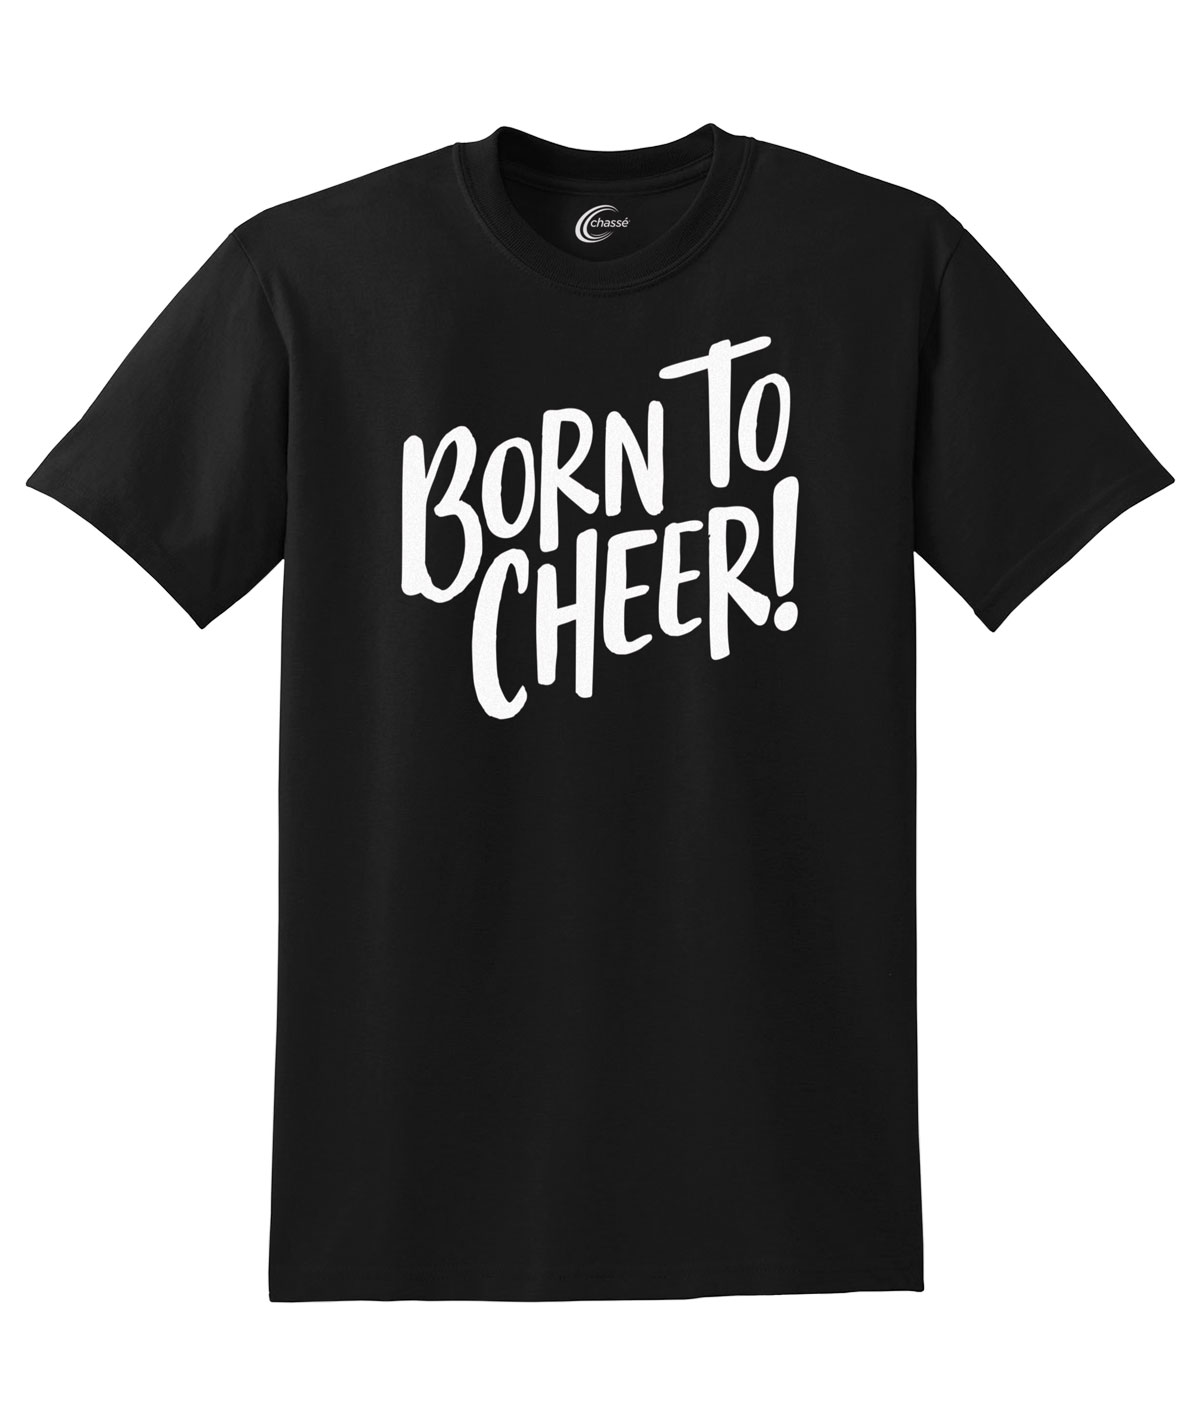 Chasse Born to Cheer Tee